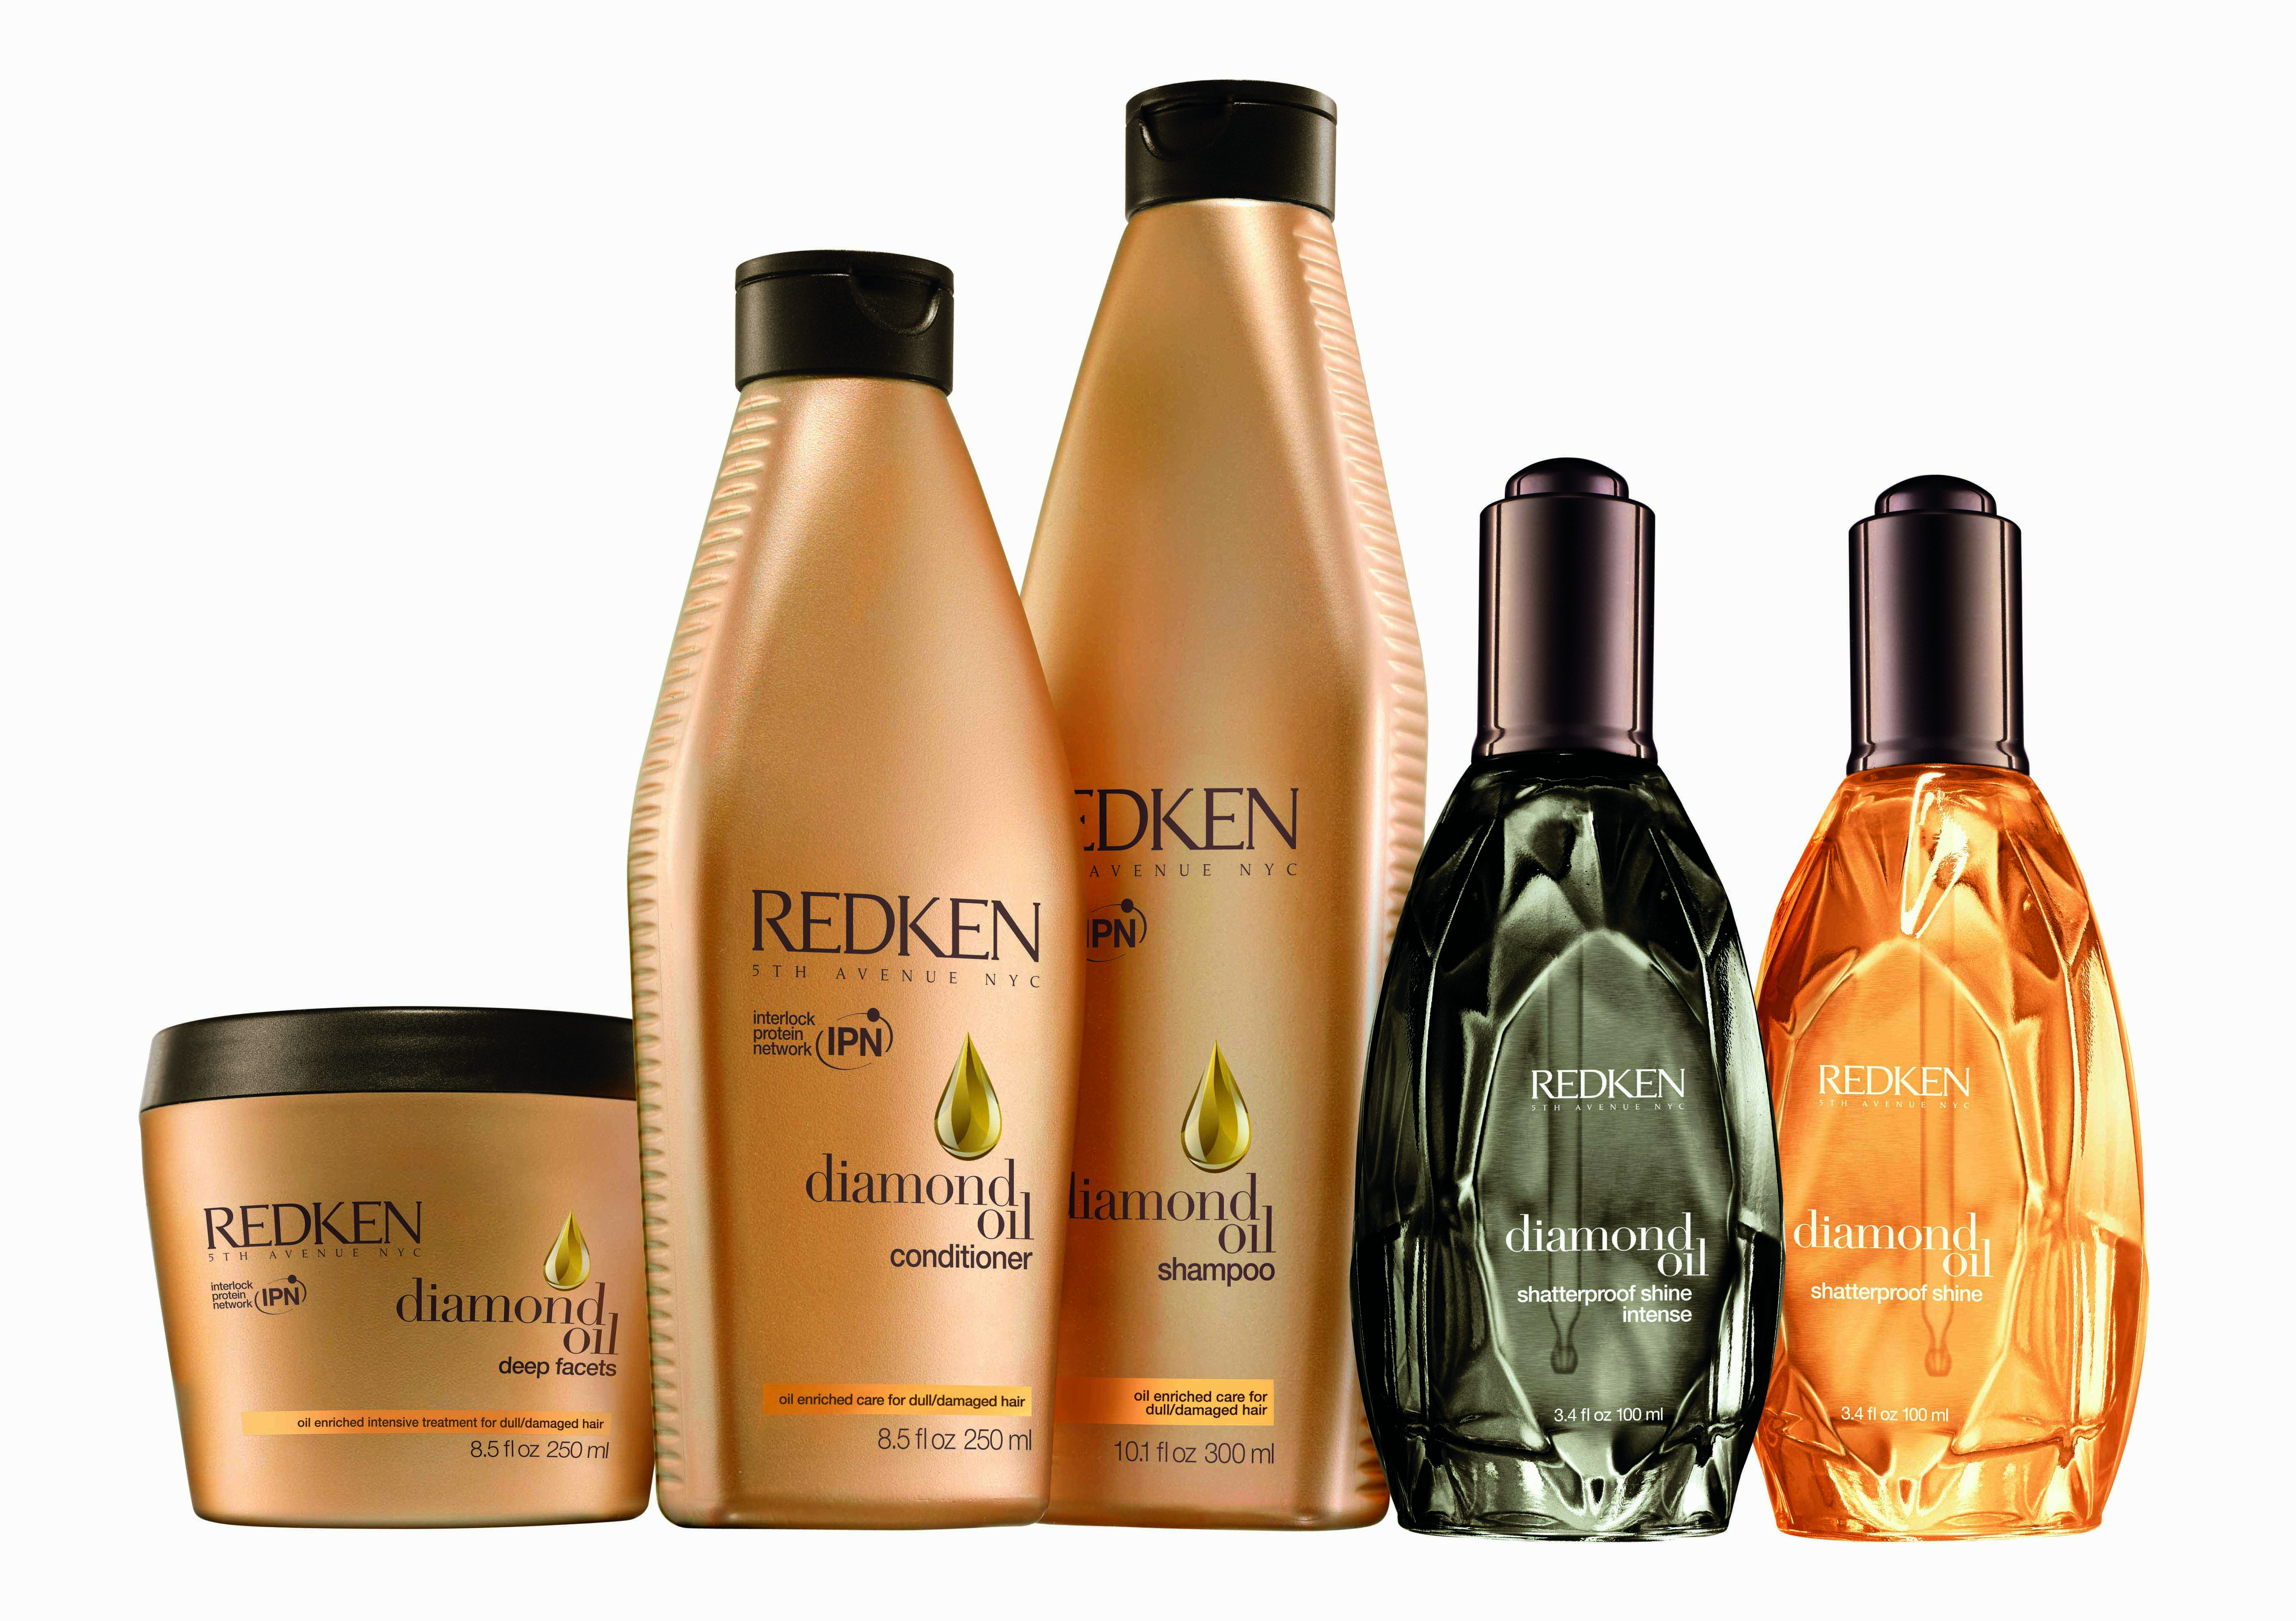 Diamonds Are a Girl’s Best Friend – New Diamond Oil Haircare Collection by Redken